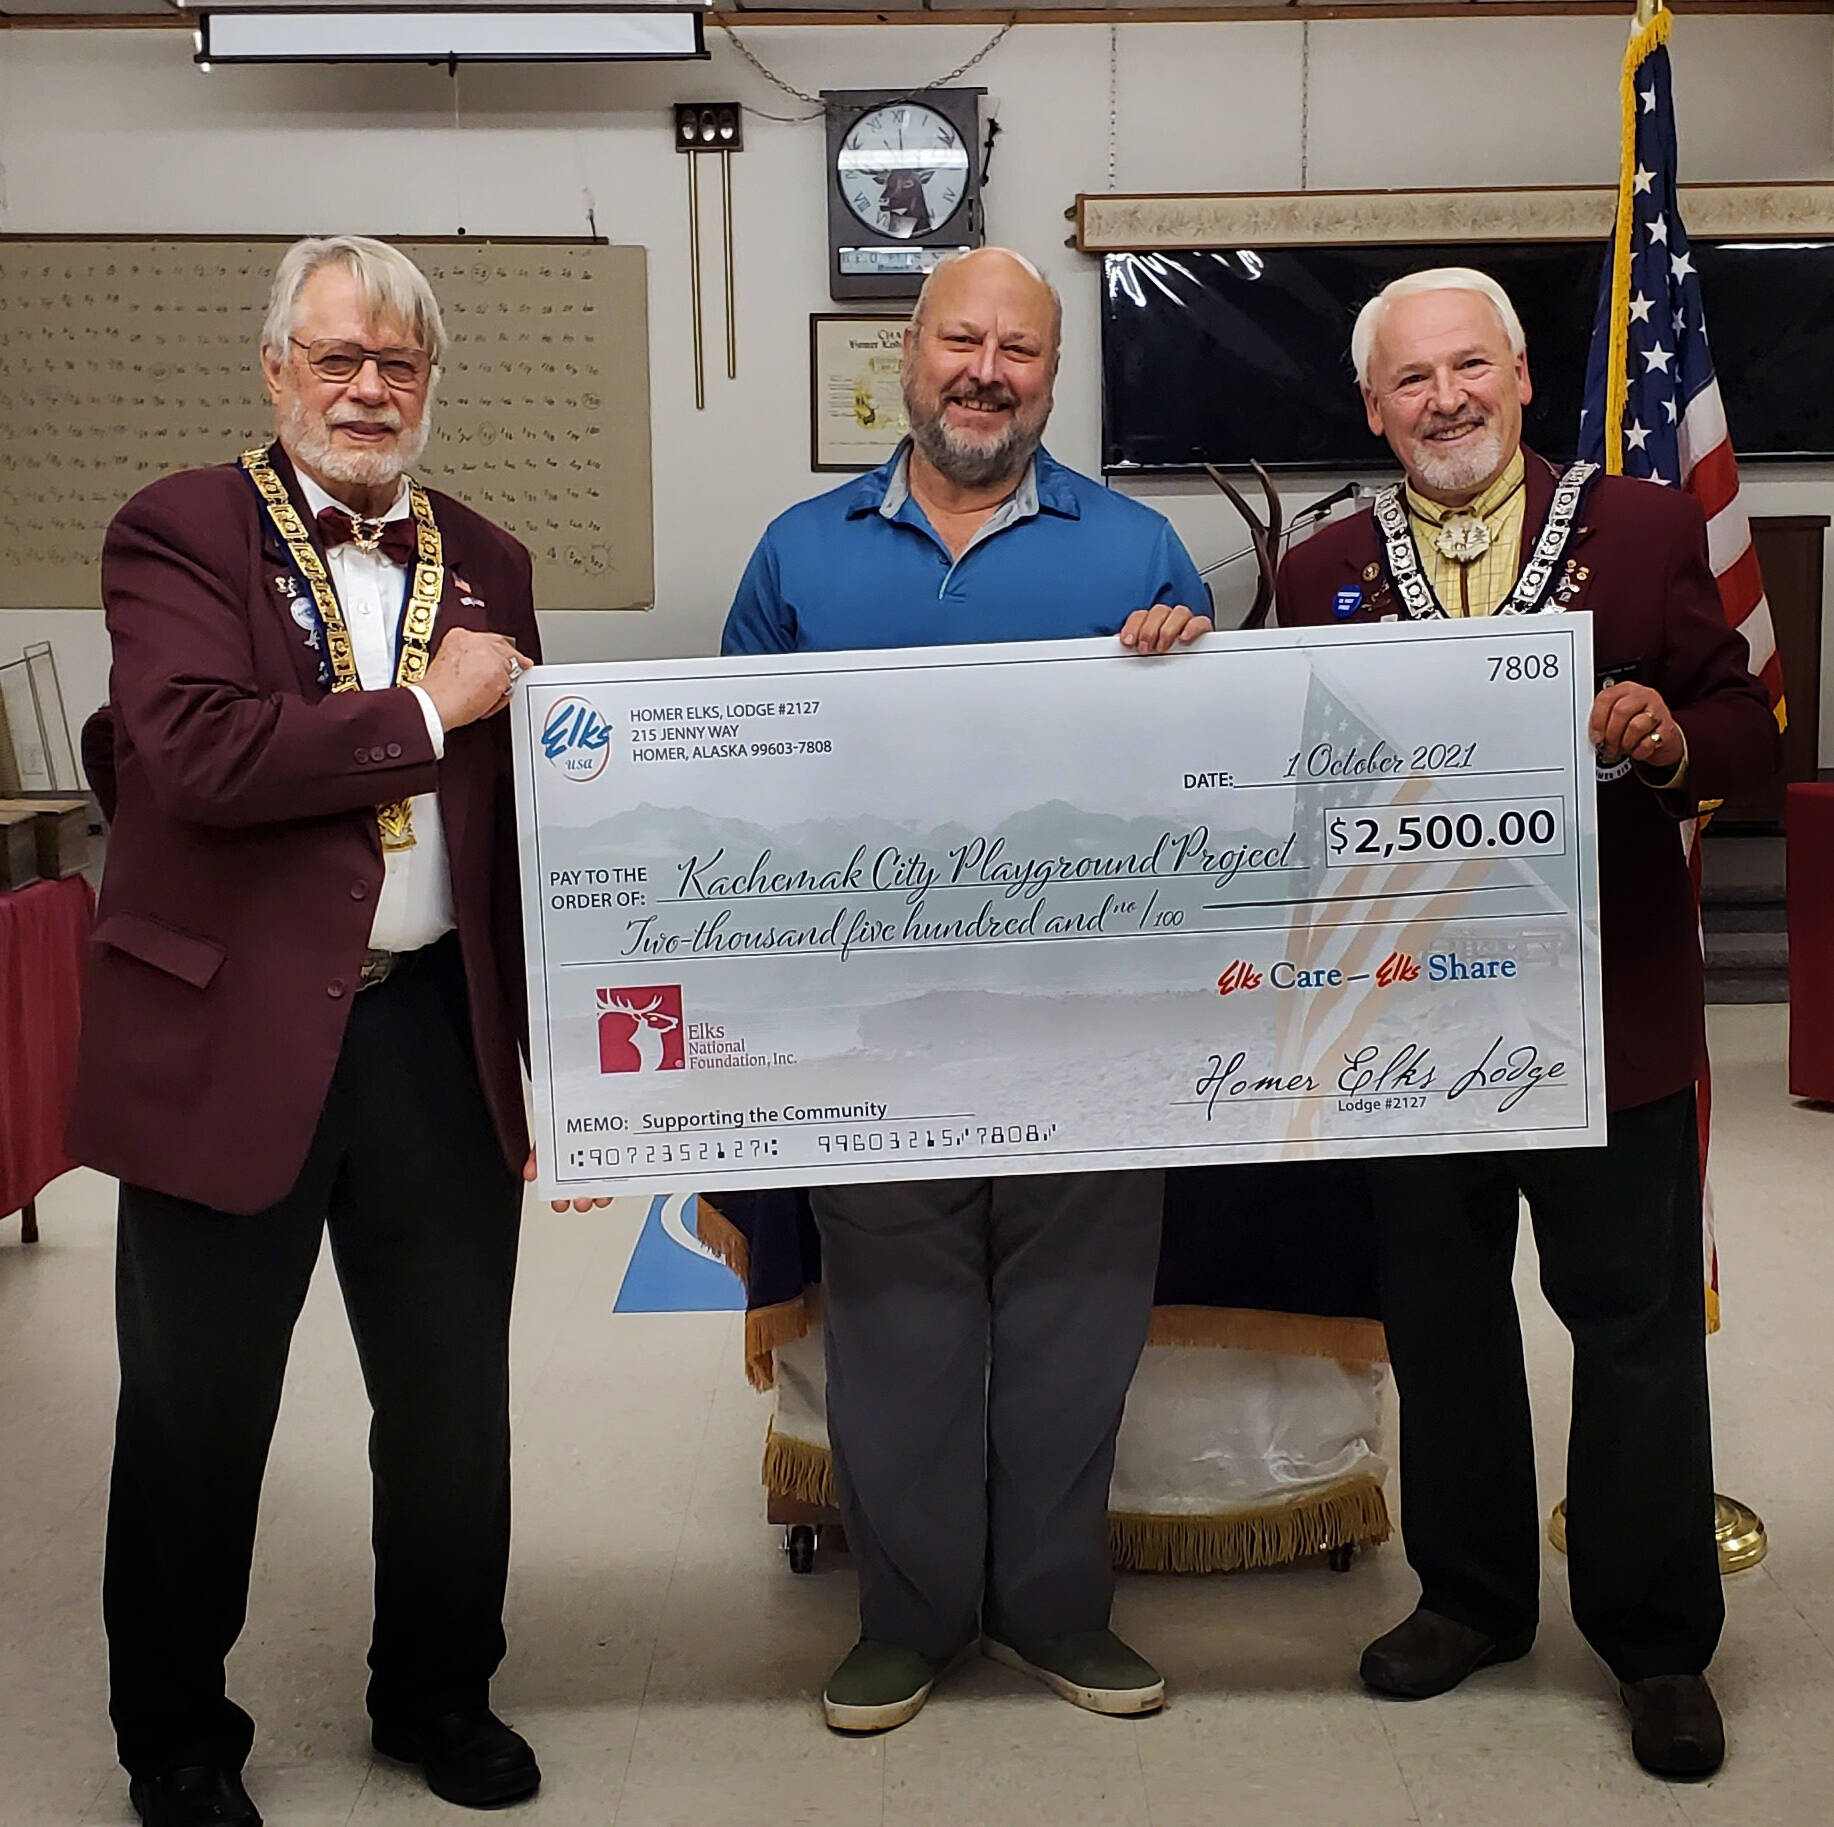 Homer Elks Lodge President David Spell, left, and Homer Elks Lodge Grant Coordinator Tom Stroozas, far right, present a $2,500 check to Kachemak City Council member Bill Fry, center, to help with construction of the Kachemak City Playground Project. (Photo provided)